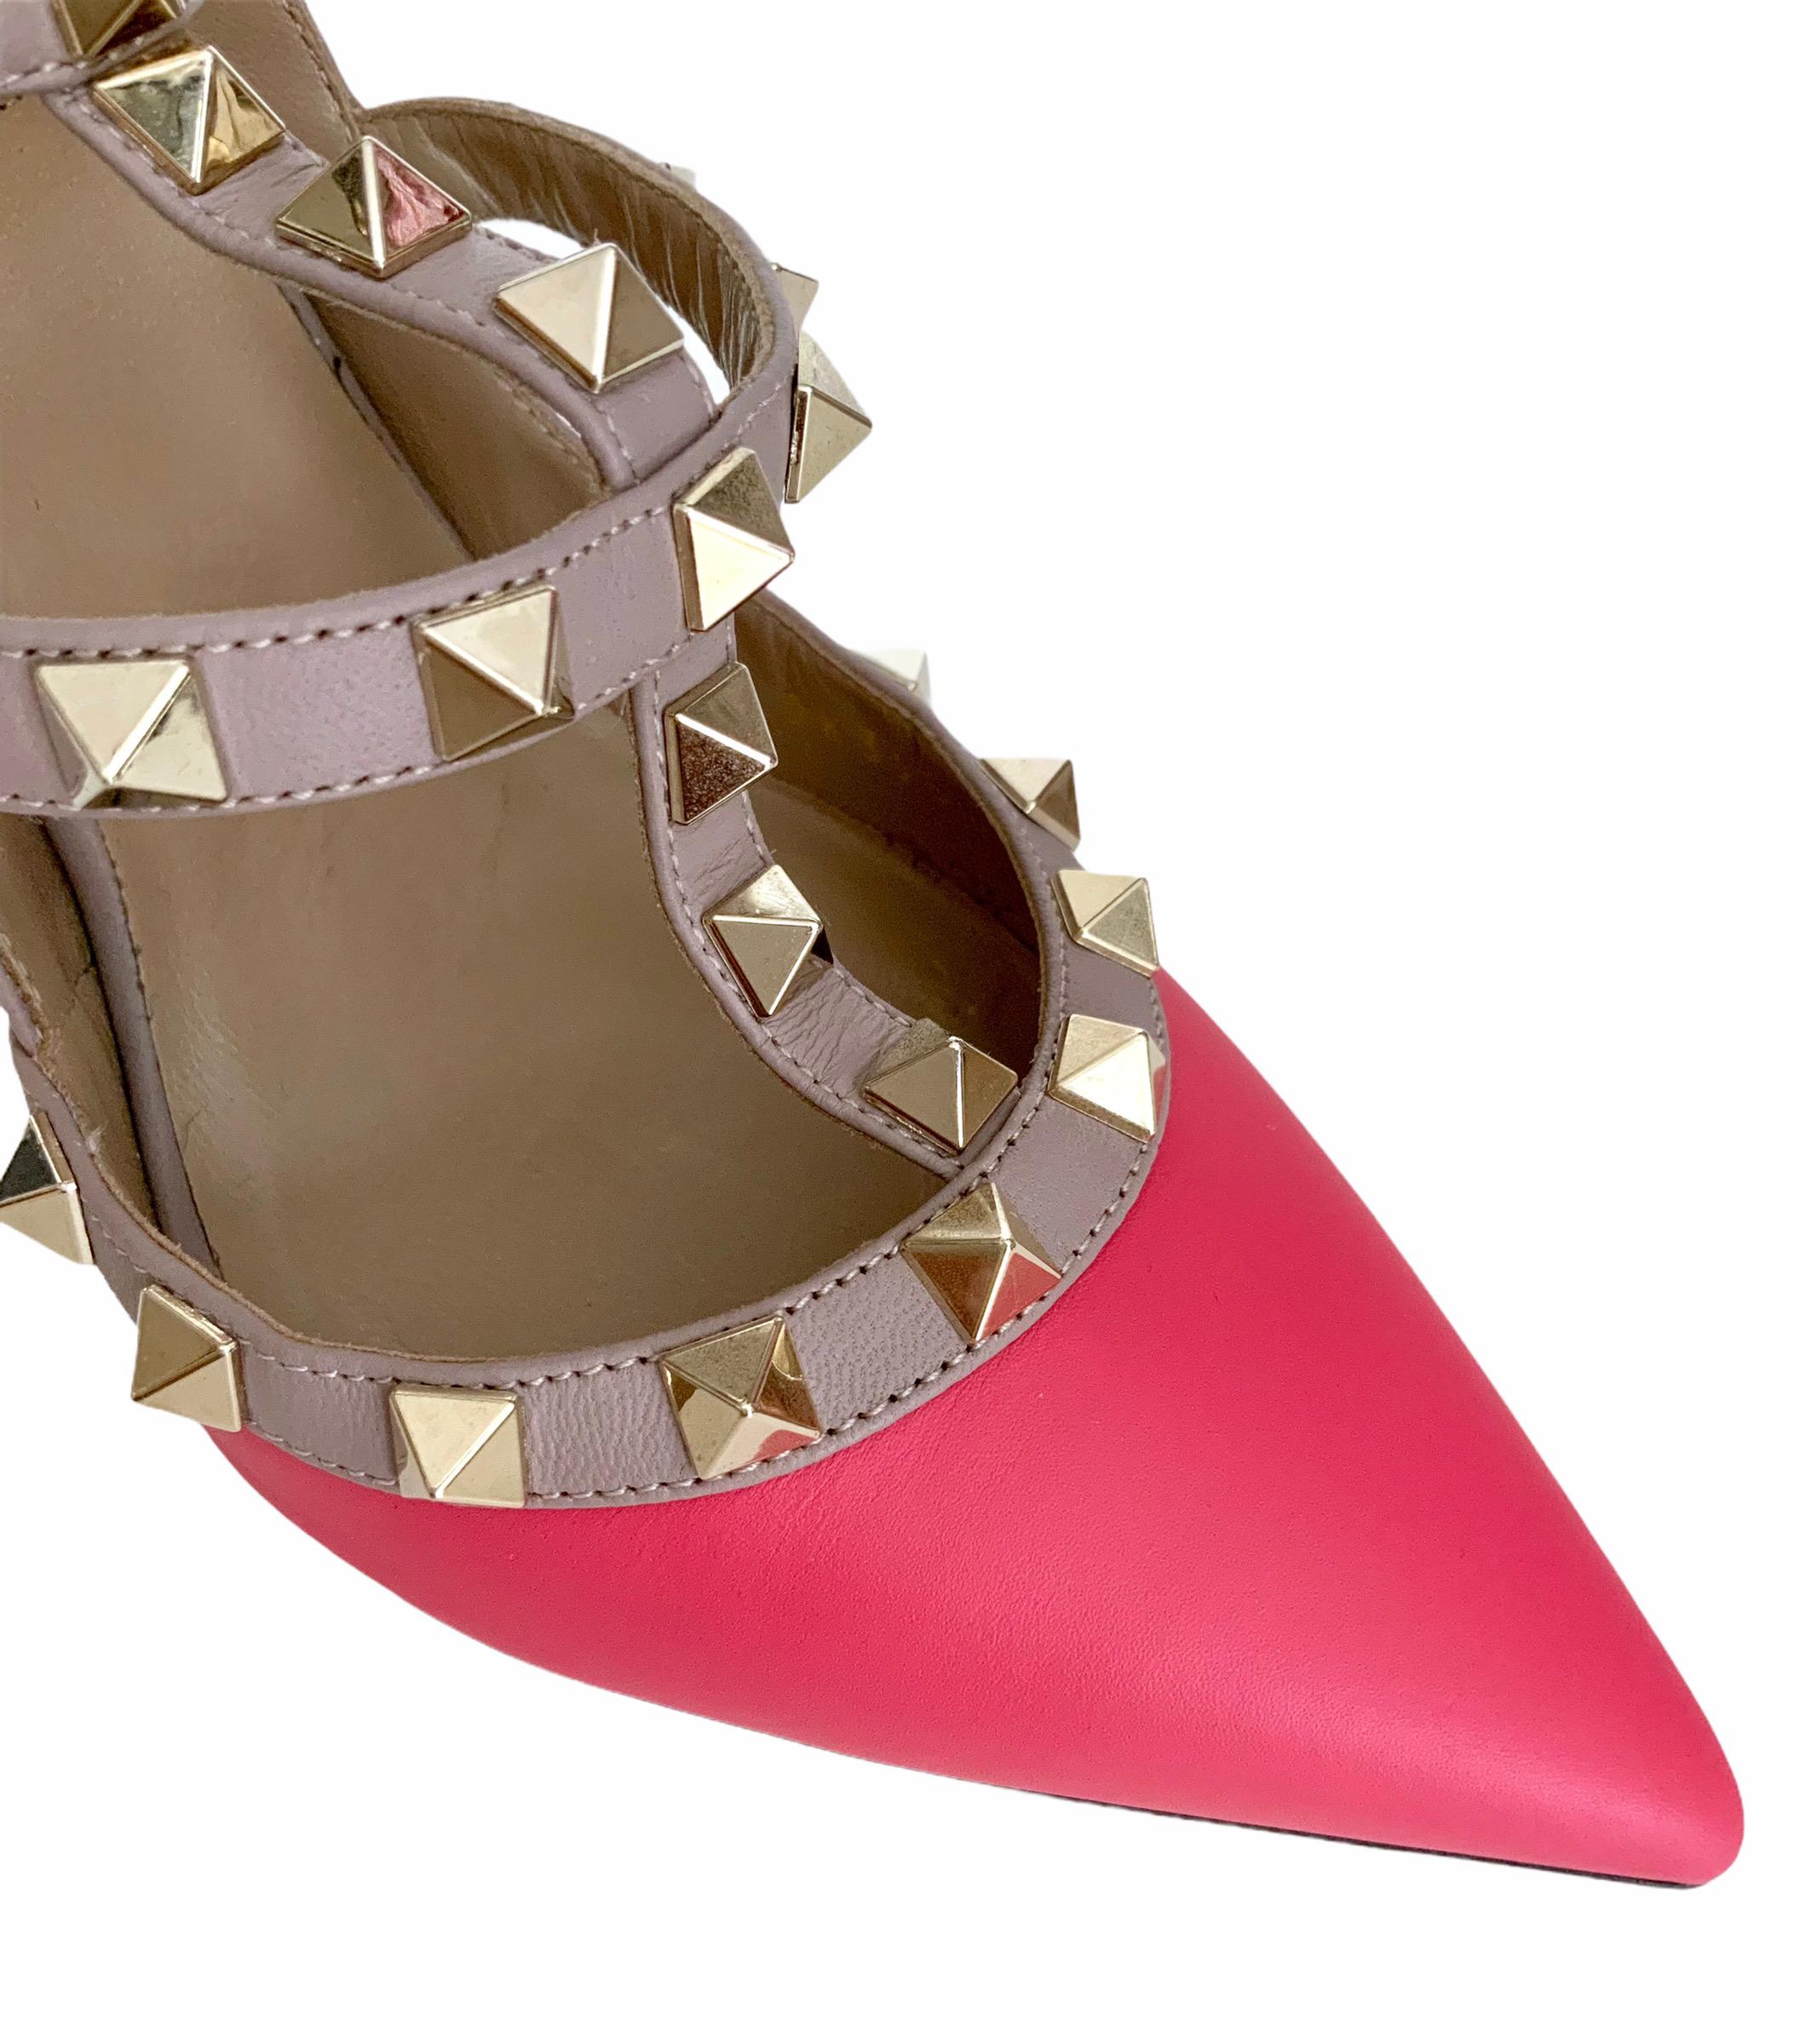 Beautiful pre-owned but New Rockstud ankle strap pumps from the house of Valentino Garavani !
They are crafted in a bright pink calfskin leather with powder-colour nappa leather piping and ankle straps. 
The studs are platinum-finish and there is an